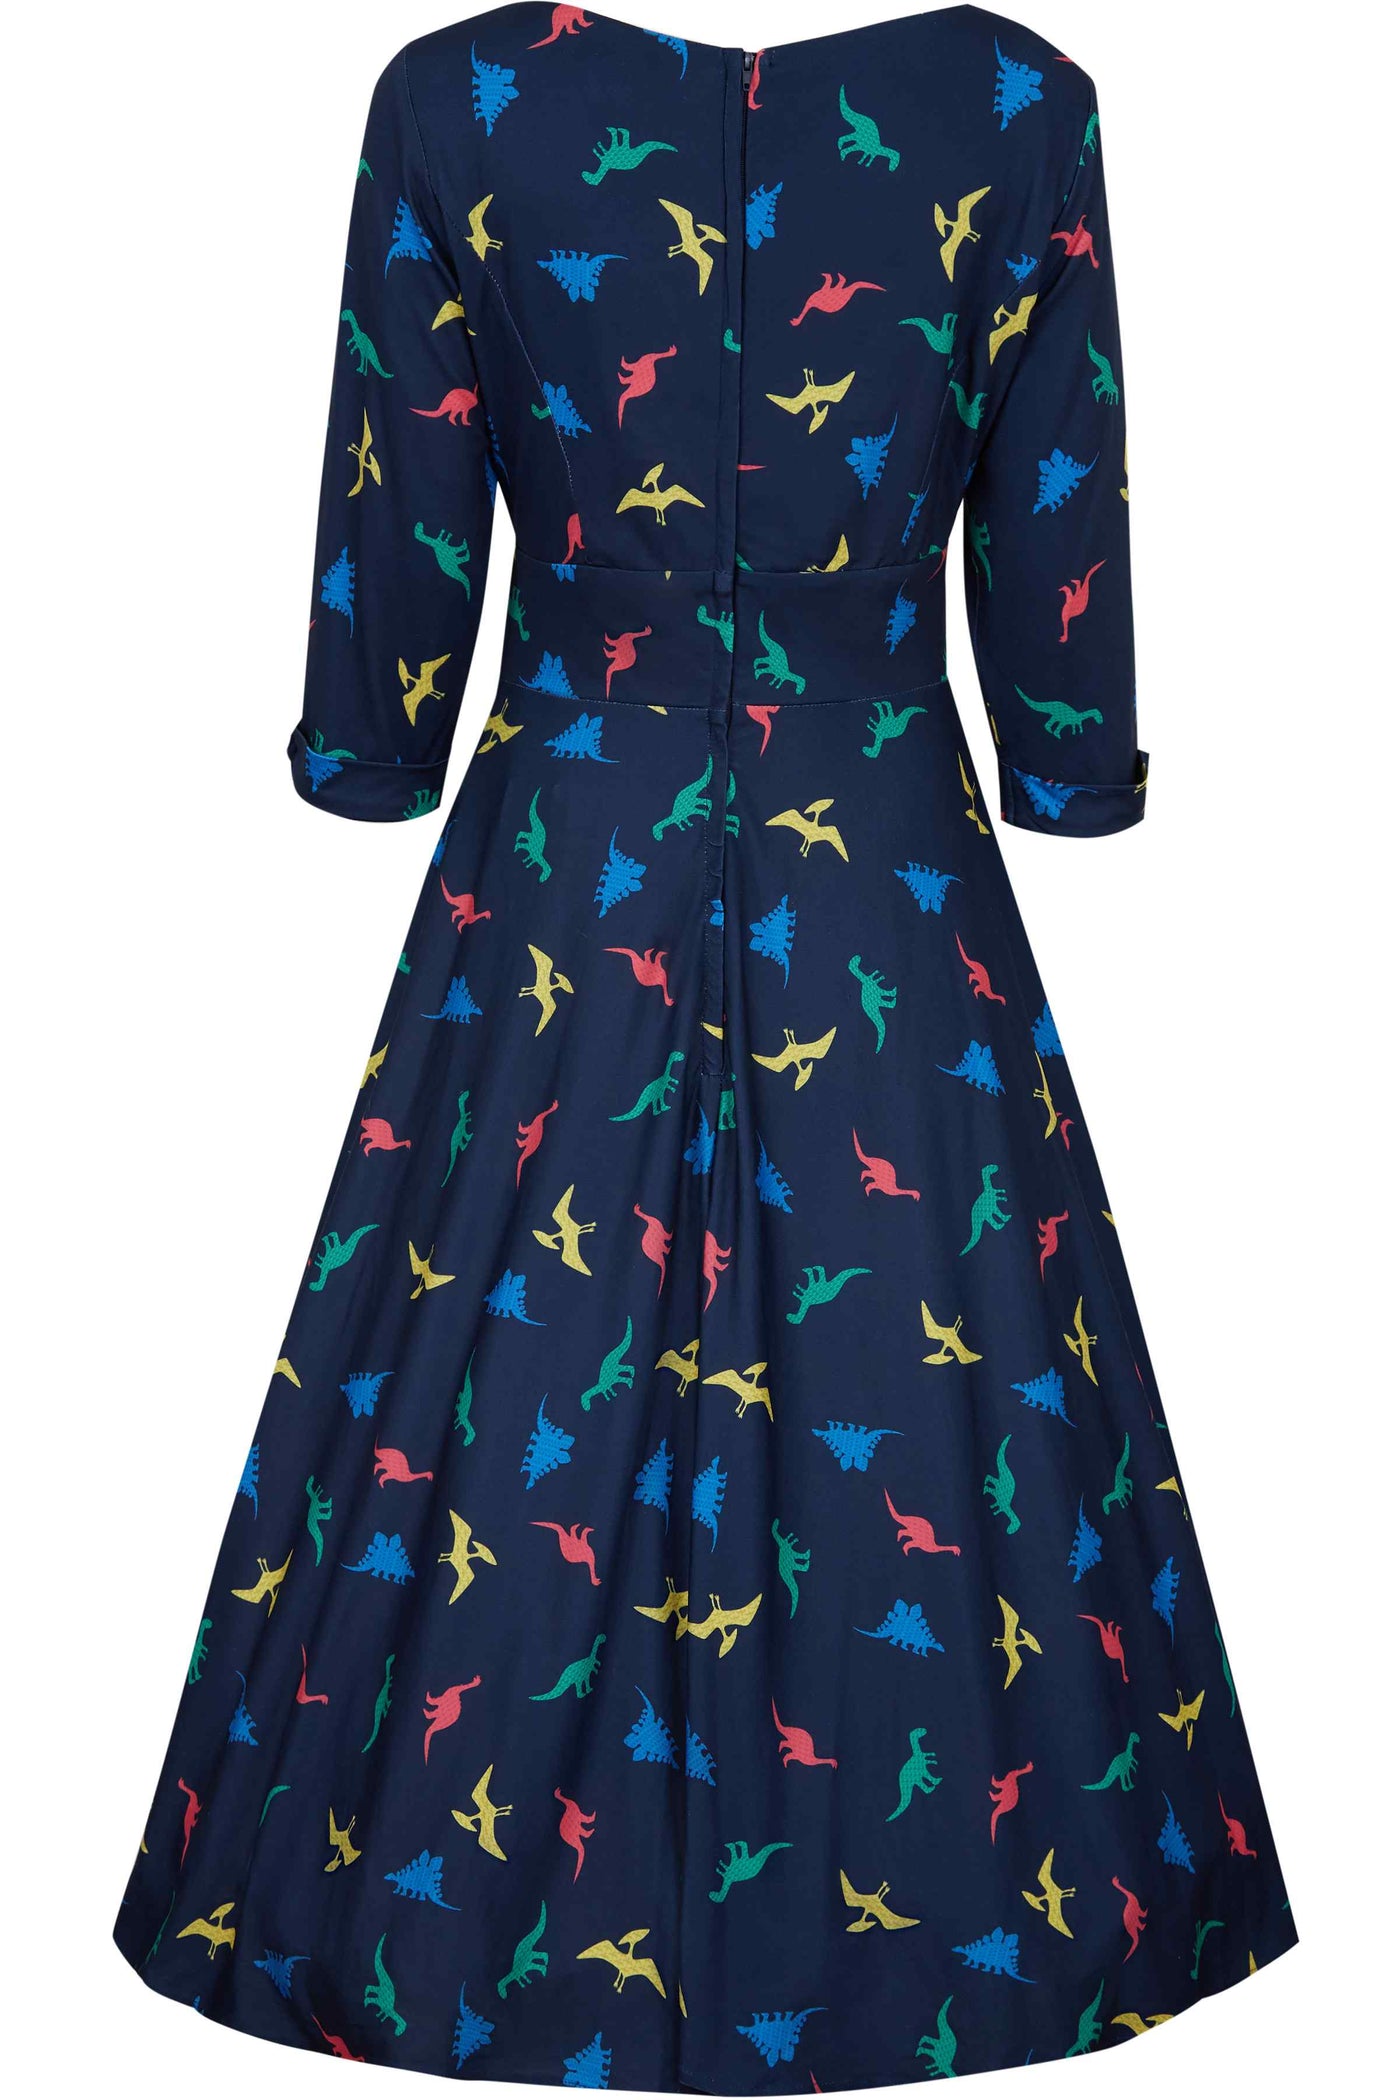 Back View of Colourful Dinosaur Print Midi Dress in Navy Blue